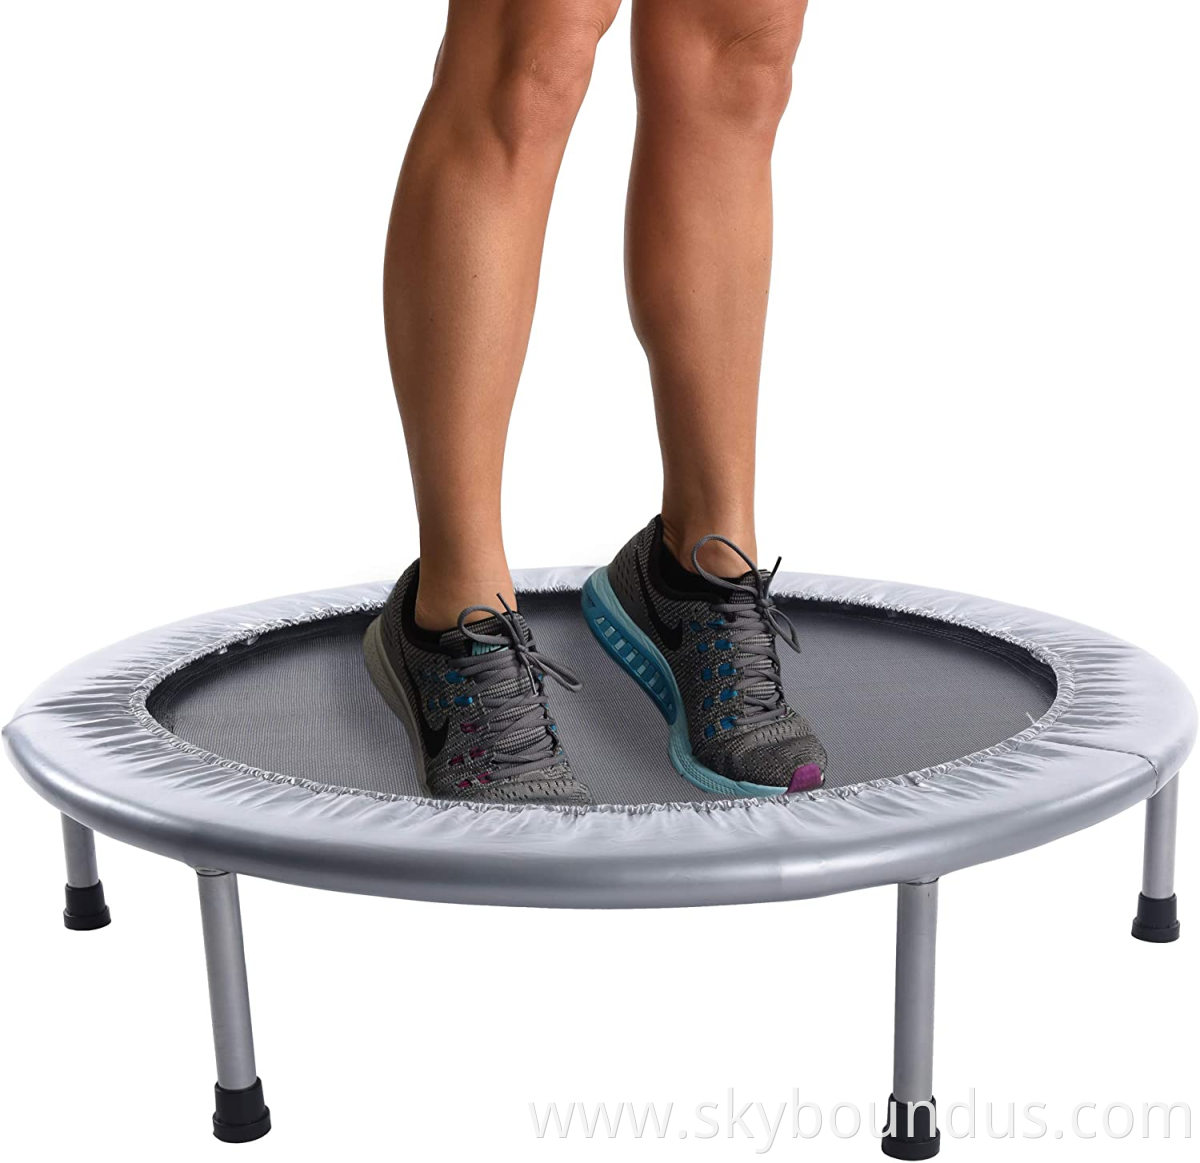 40" Mini Trampoline Exercise Trampolines with Safety Pad, Fitness Rebounder Trampoline for Adults Kids Indoor Outdoor Exercise